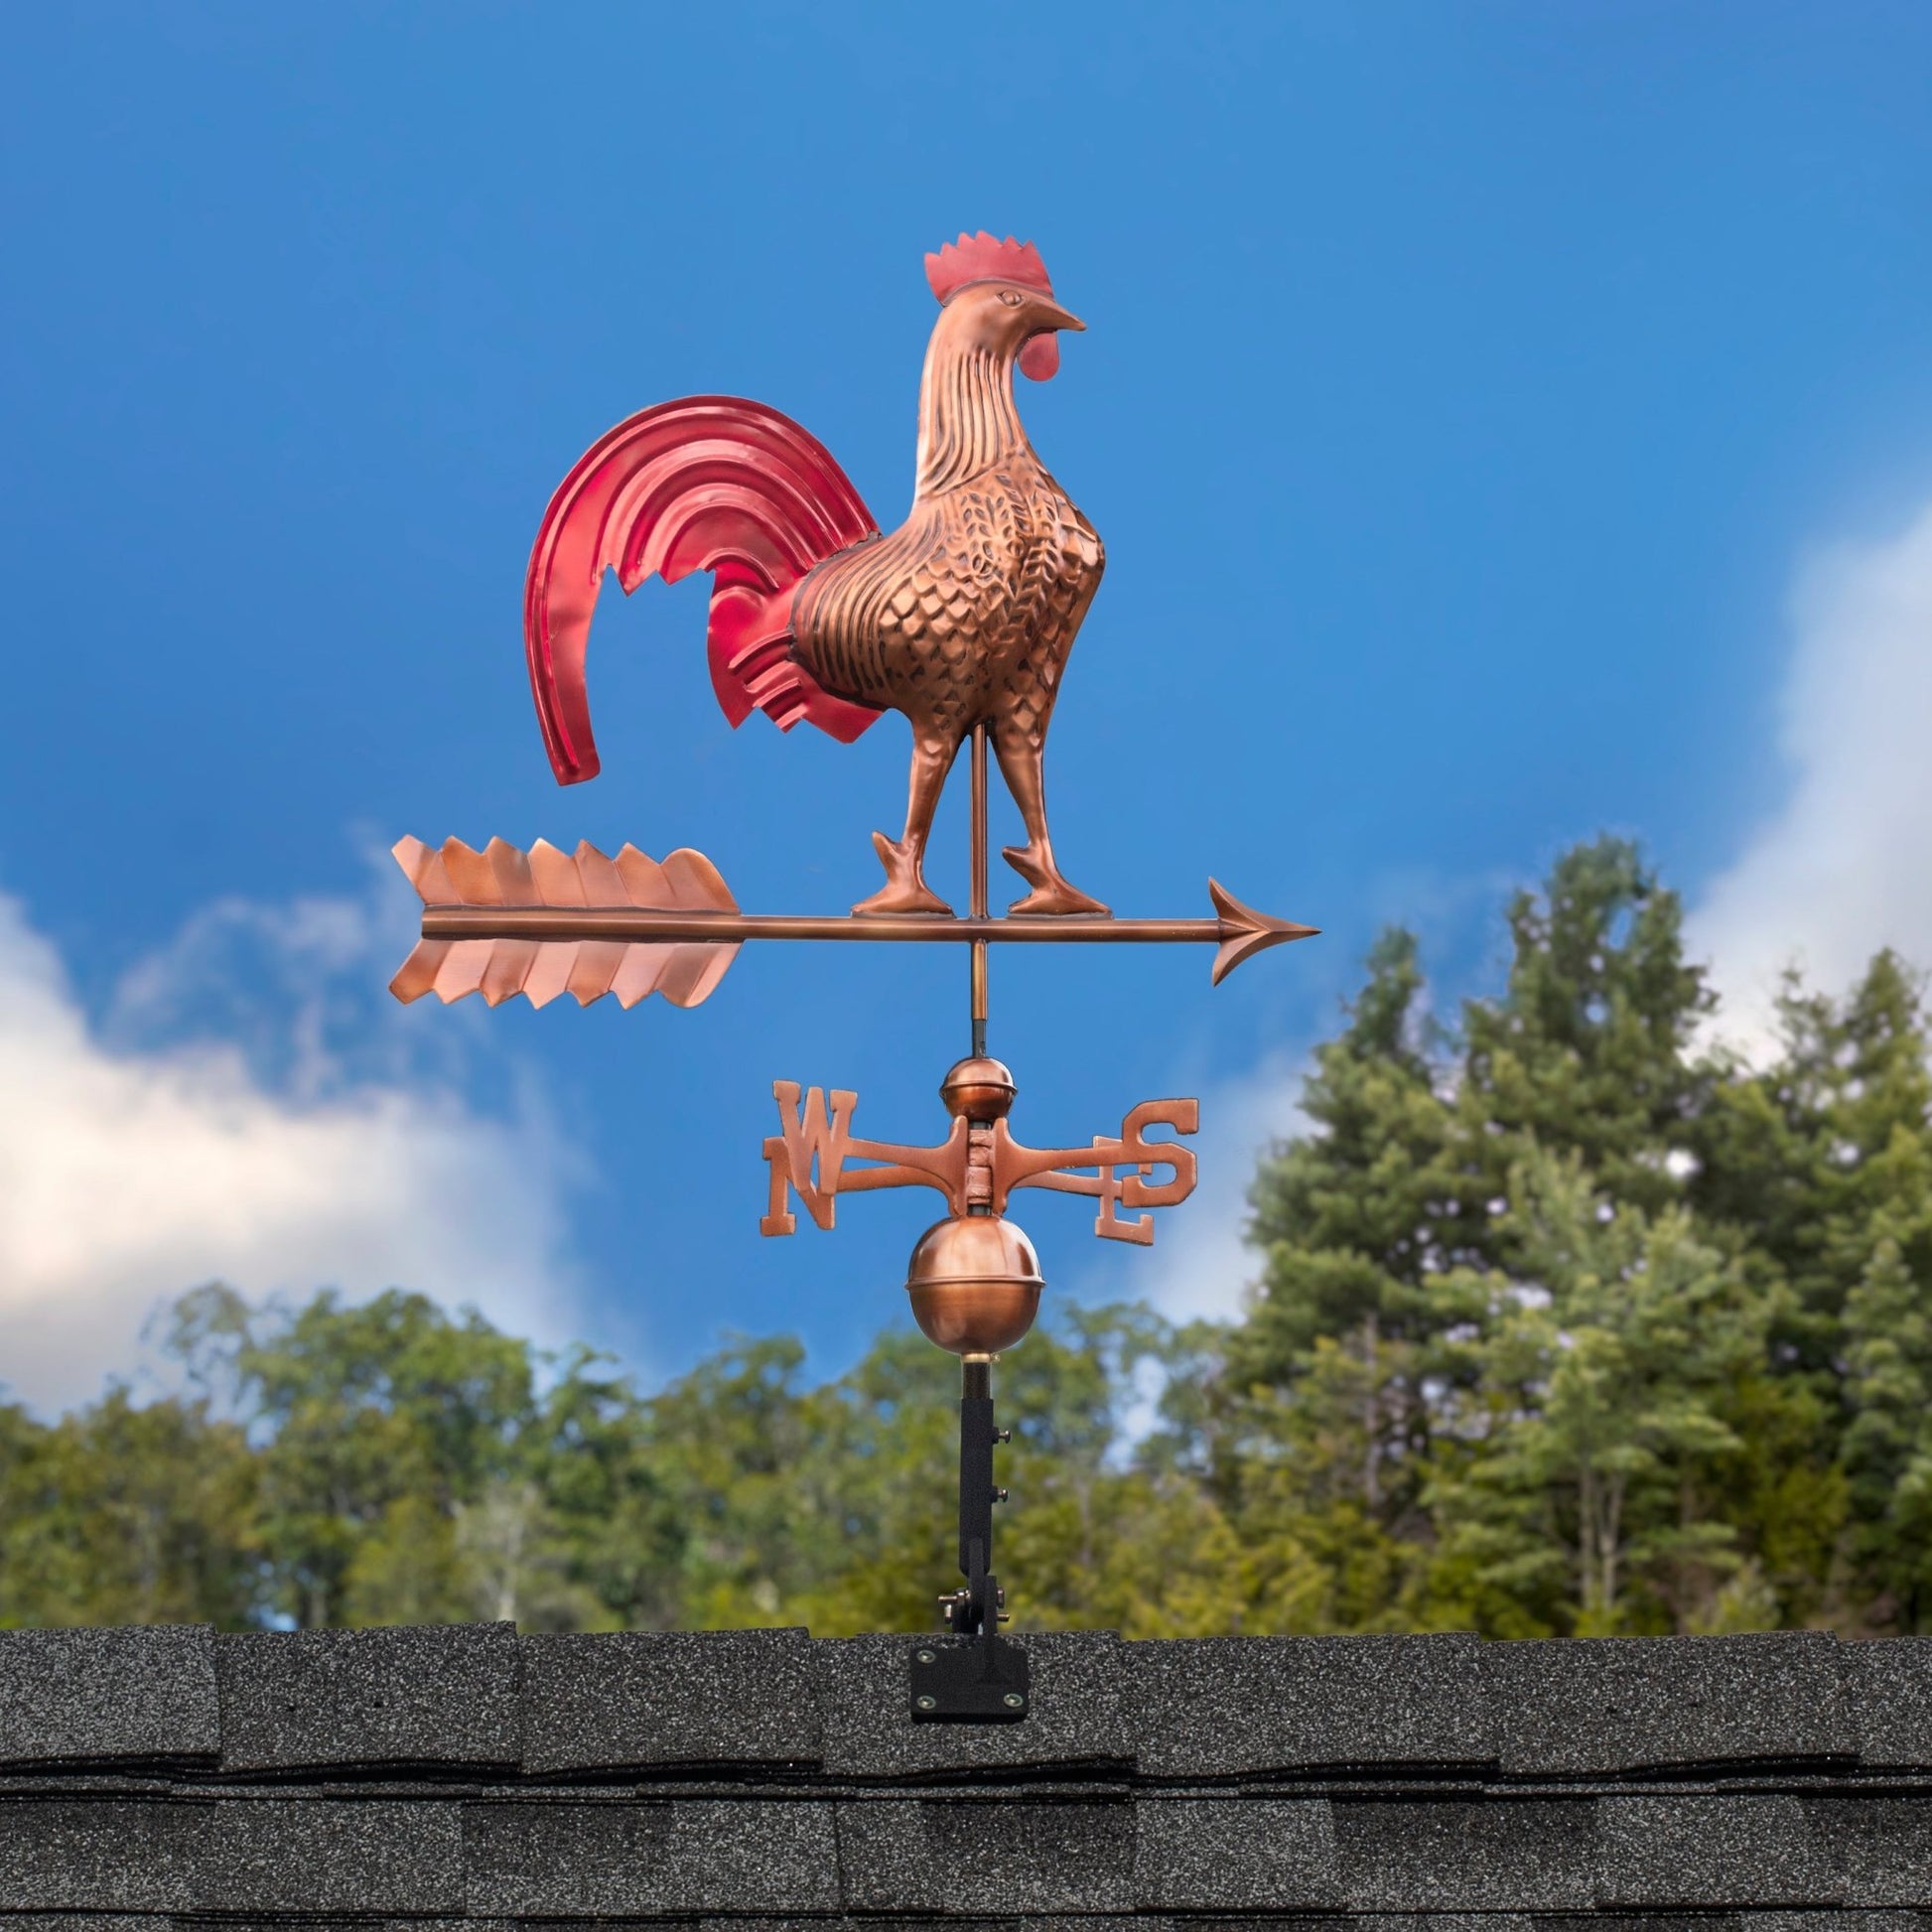 Rooster Weathervane - Good Directions